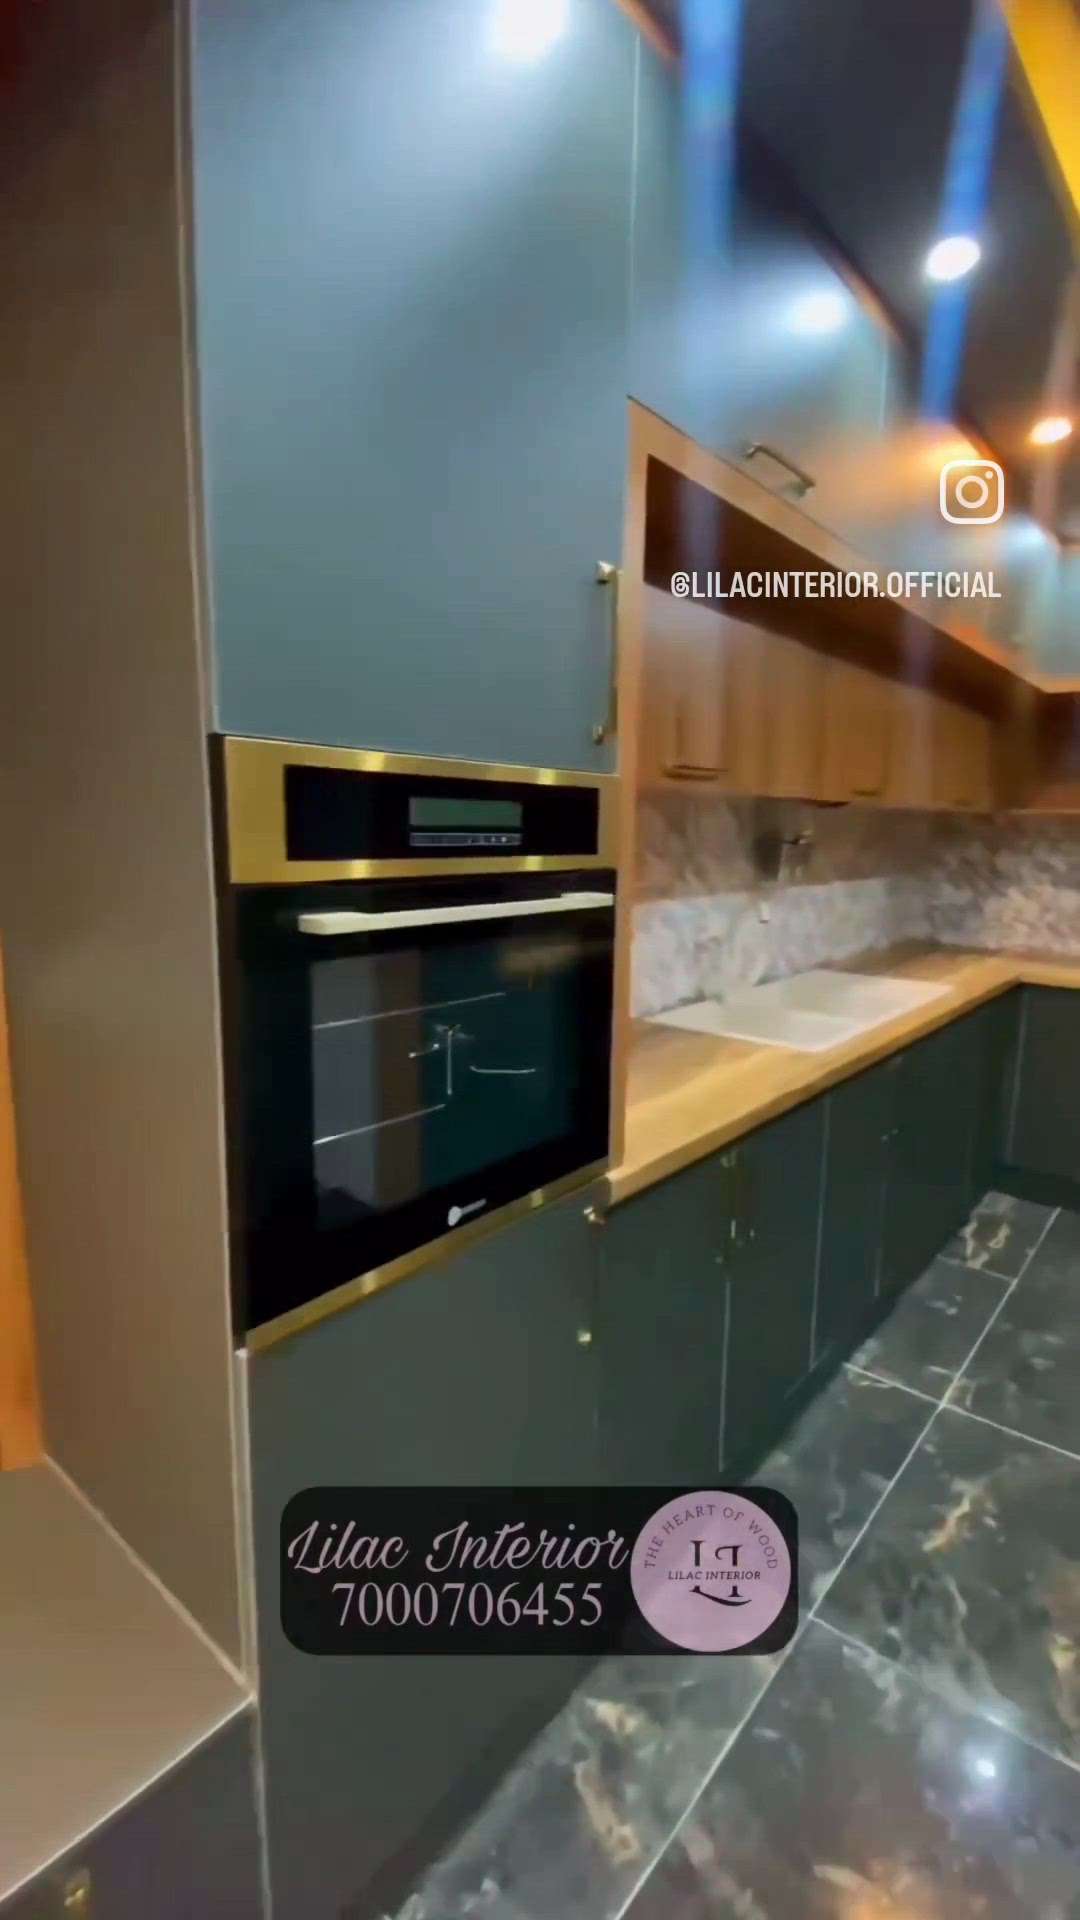 Charcoal & Tan Finish Modular Kitchen by Lilac Interior ❤️🤩

📞Contact for work - 7000706455
📩 Comment or DM 'smart' to order

#OpenKitchnen
#trendingcolour
#trendingkitchen
#openspace
#ModularKitchen
#noidainterior
#noidakitchen
#Delhihome
#delhiinteriors
#delhiinteriordesigner
#DecorIdeas
#kitchendecor #openkitchendesign #handmadekitchen #delhiinteriors #noidainterior #LargeKitchen #handmade #premiumpots #premiumproduct #premiumhomes #Modularfurniture #modularkitchenindelhi #ClosedKitchen #KitchenCabinet #WoodenKitchen #kitchen #kitchendesign #interiordesign #design #InteriorDesigner